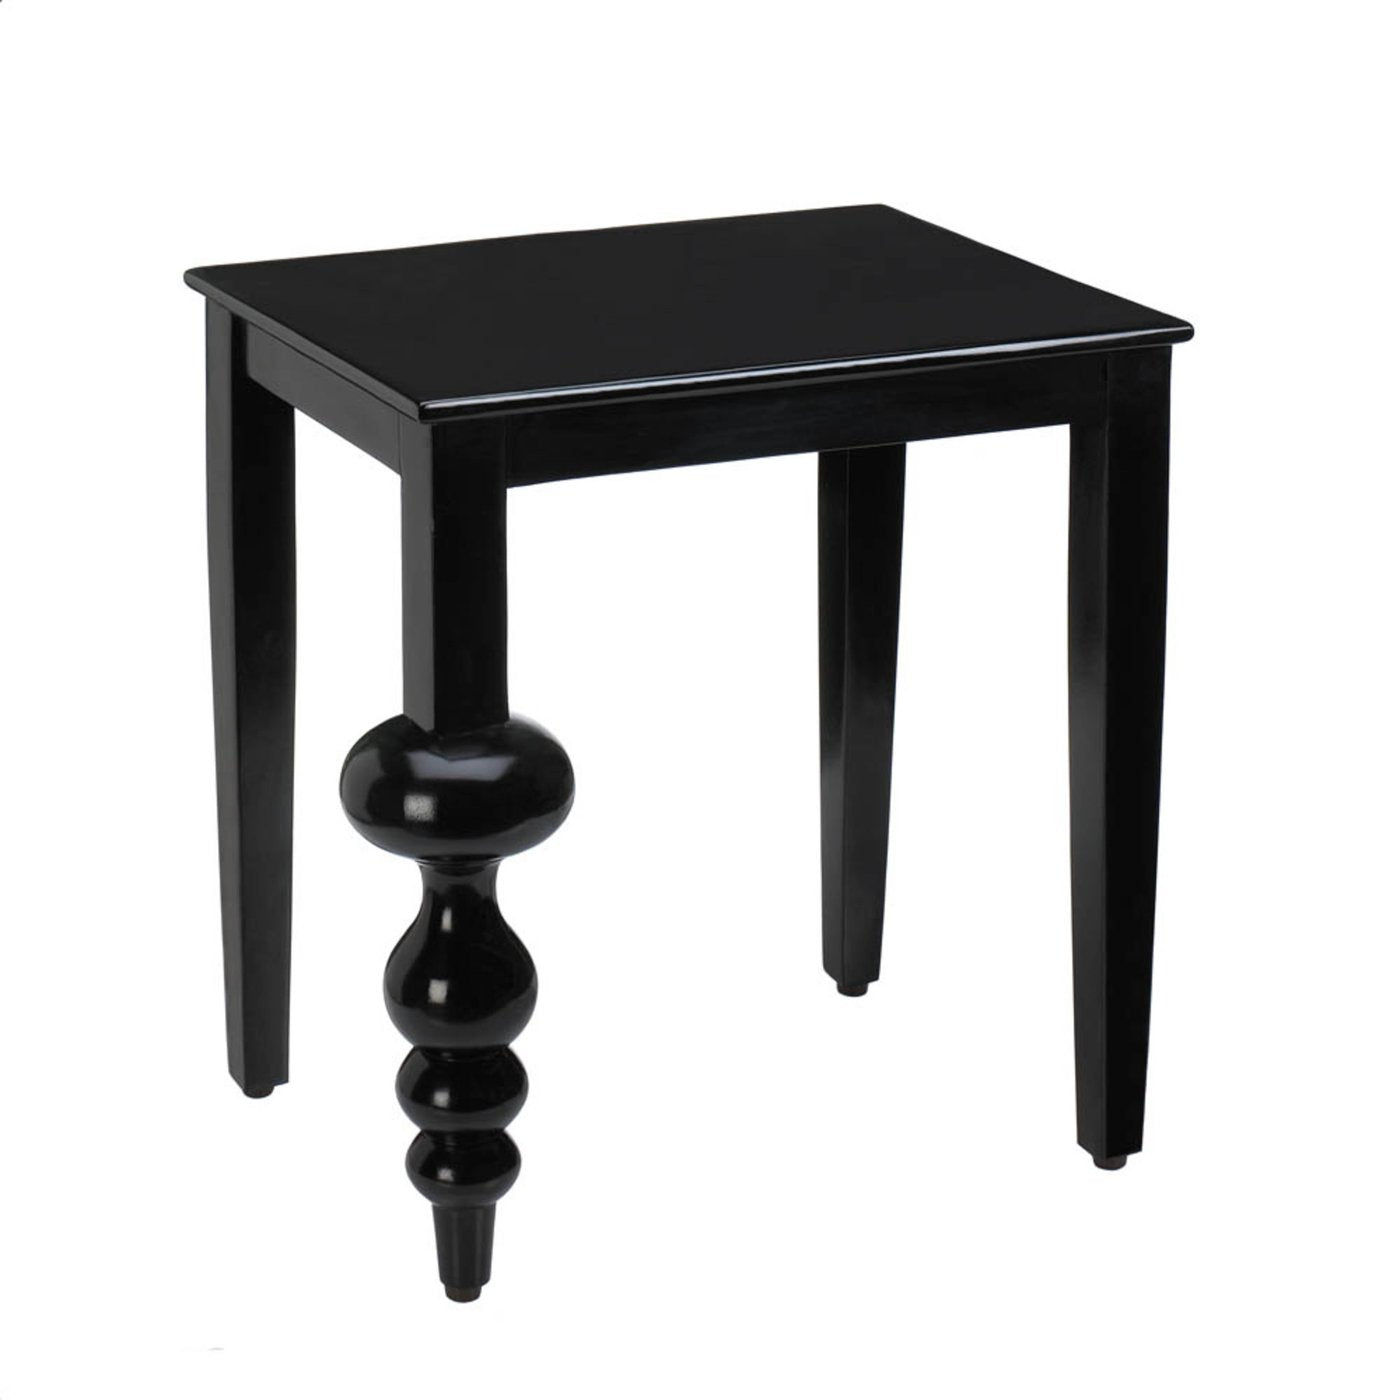 Milan Black Mango Wood Accent Side Table Lacquer Coating